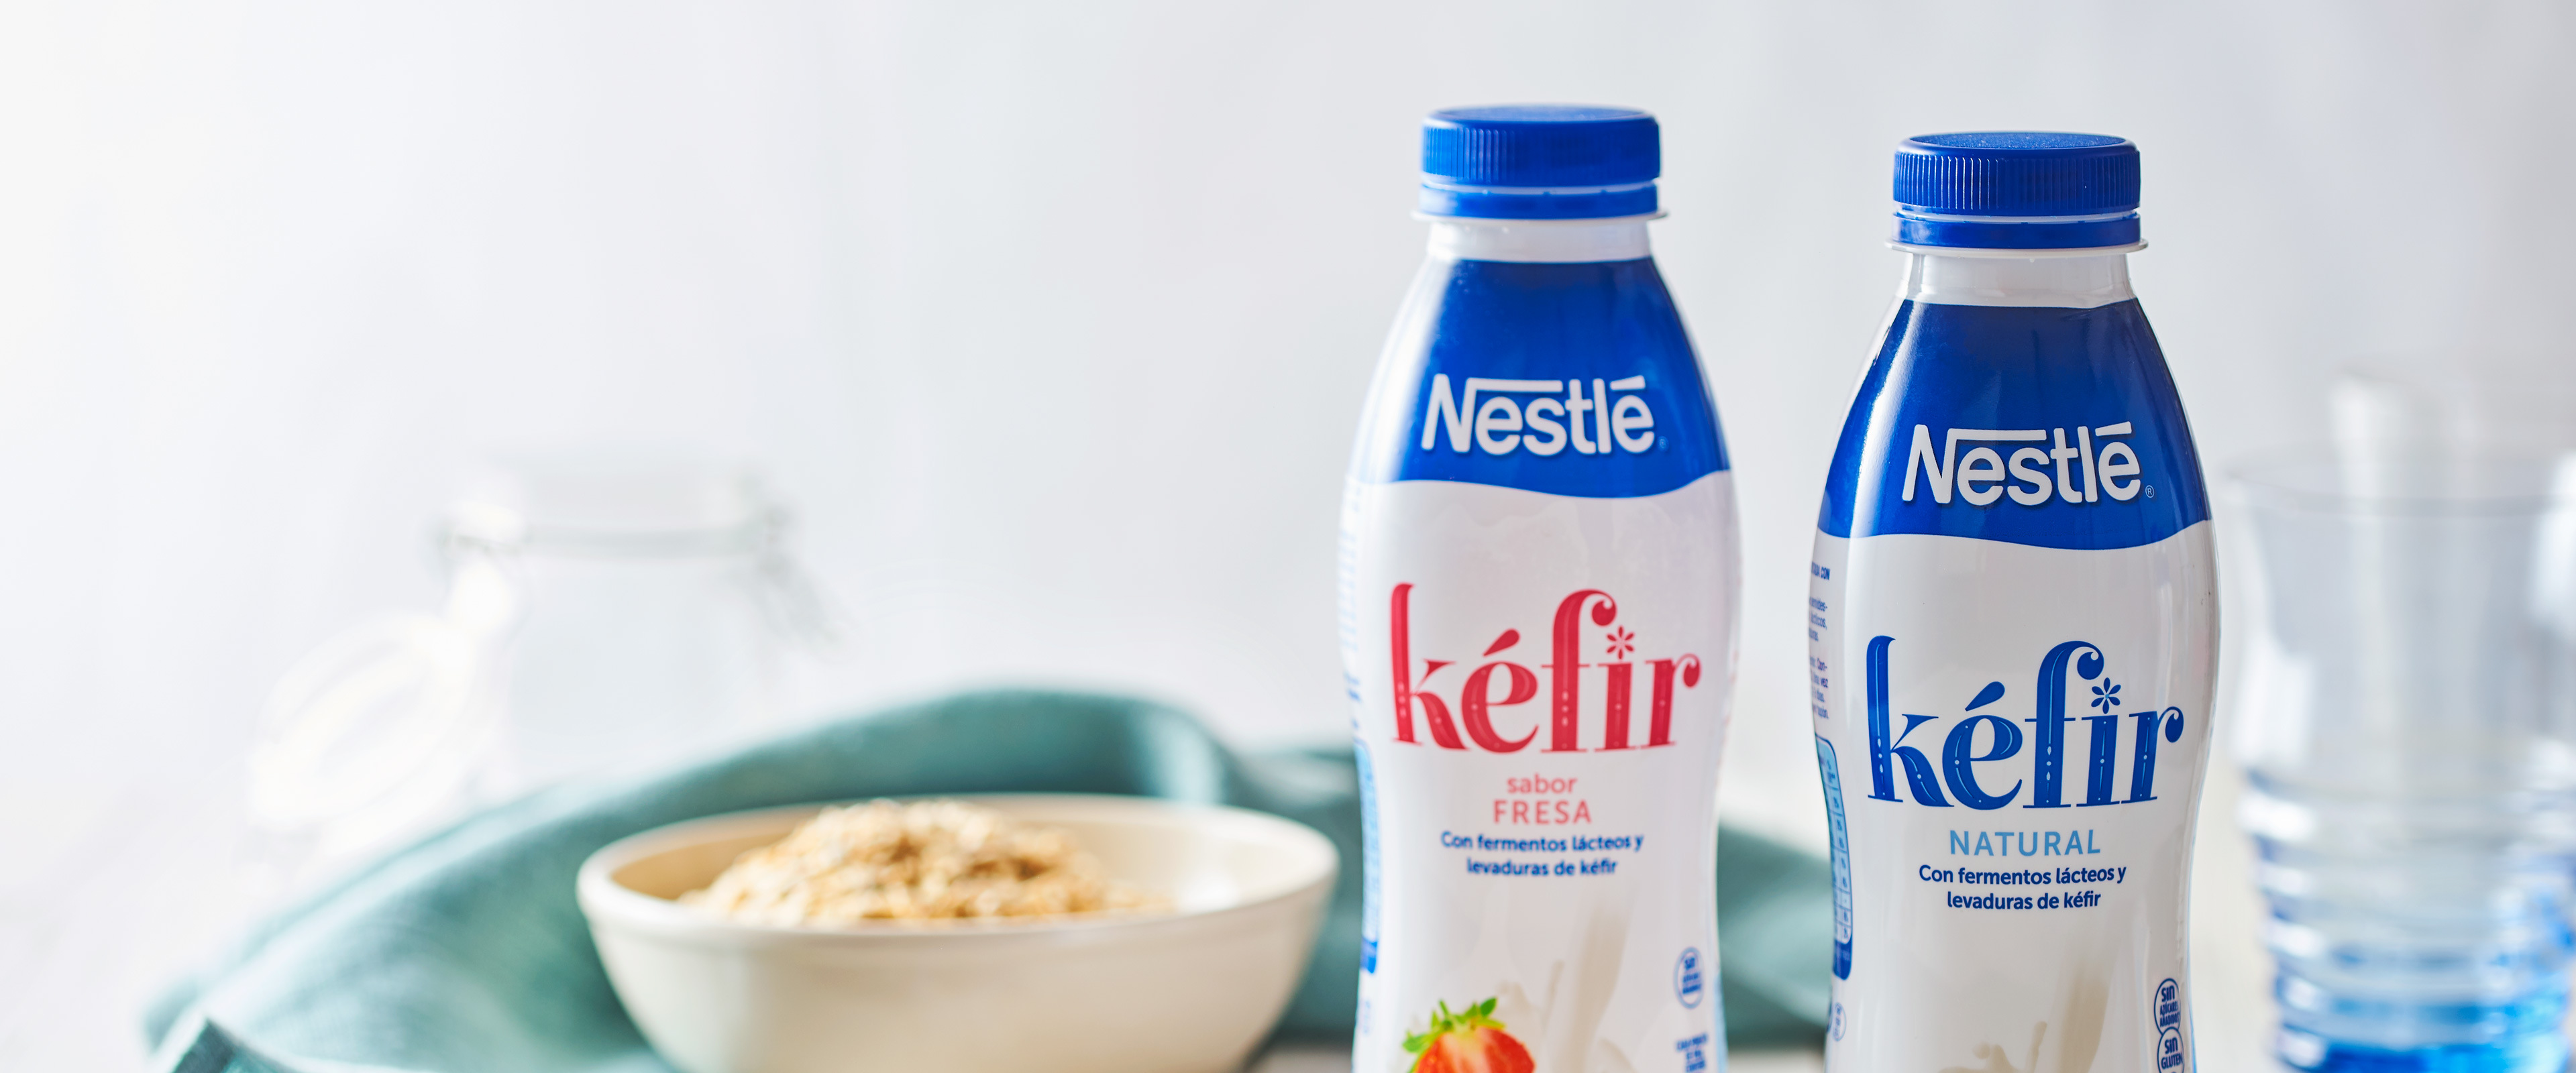 Nestlé Kefir: a traditional product for a global market